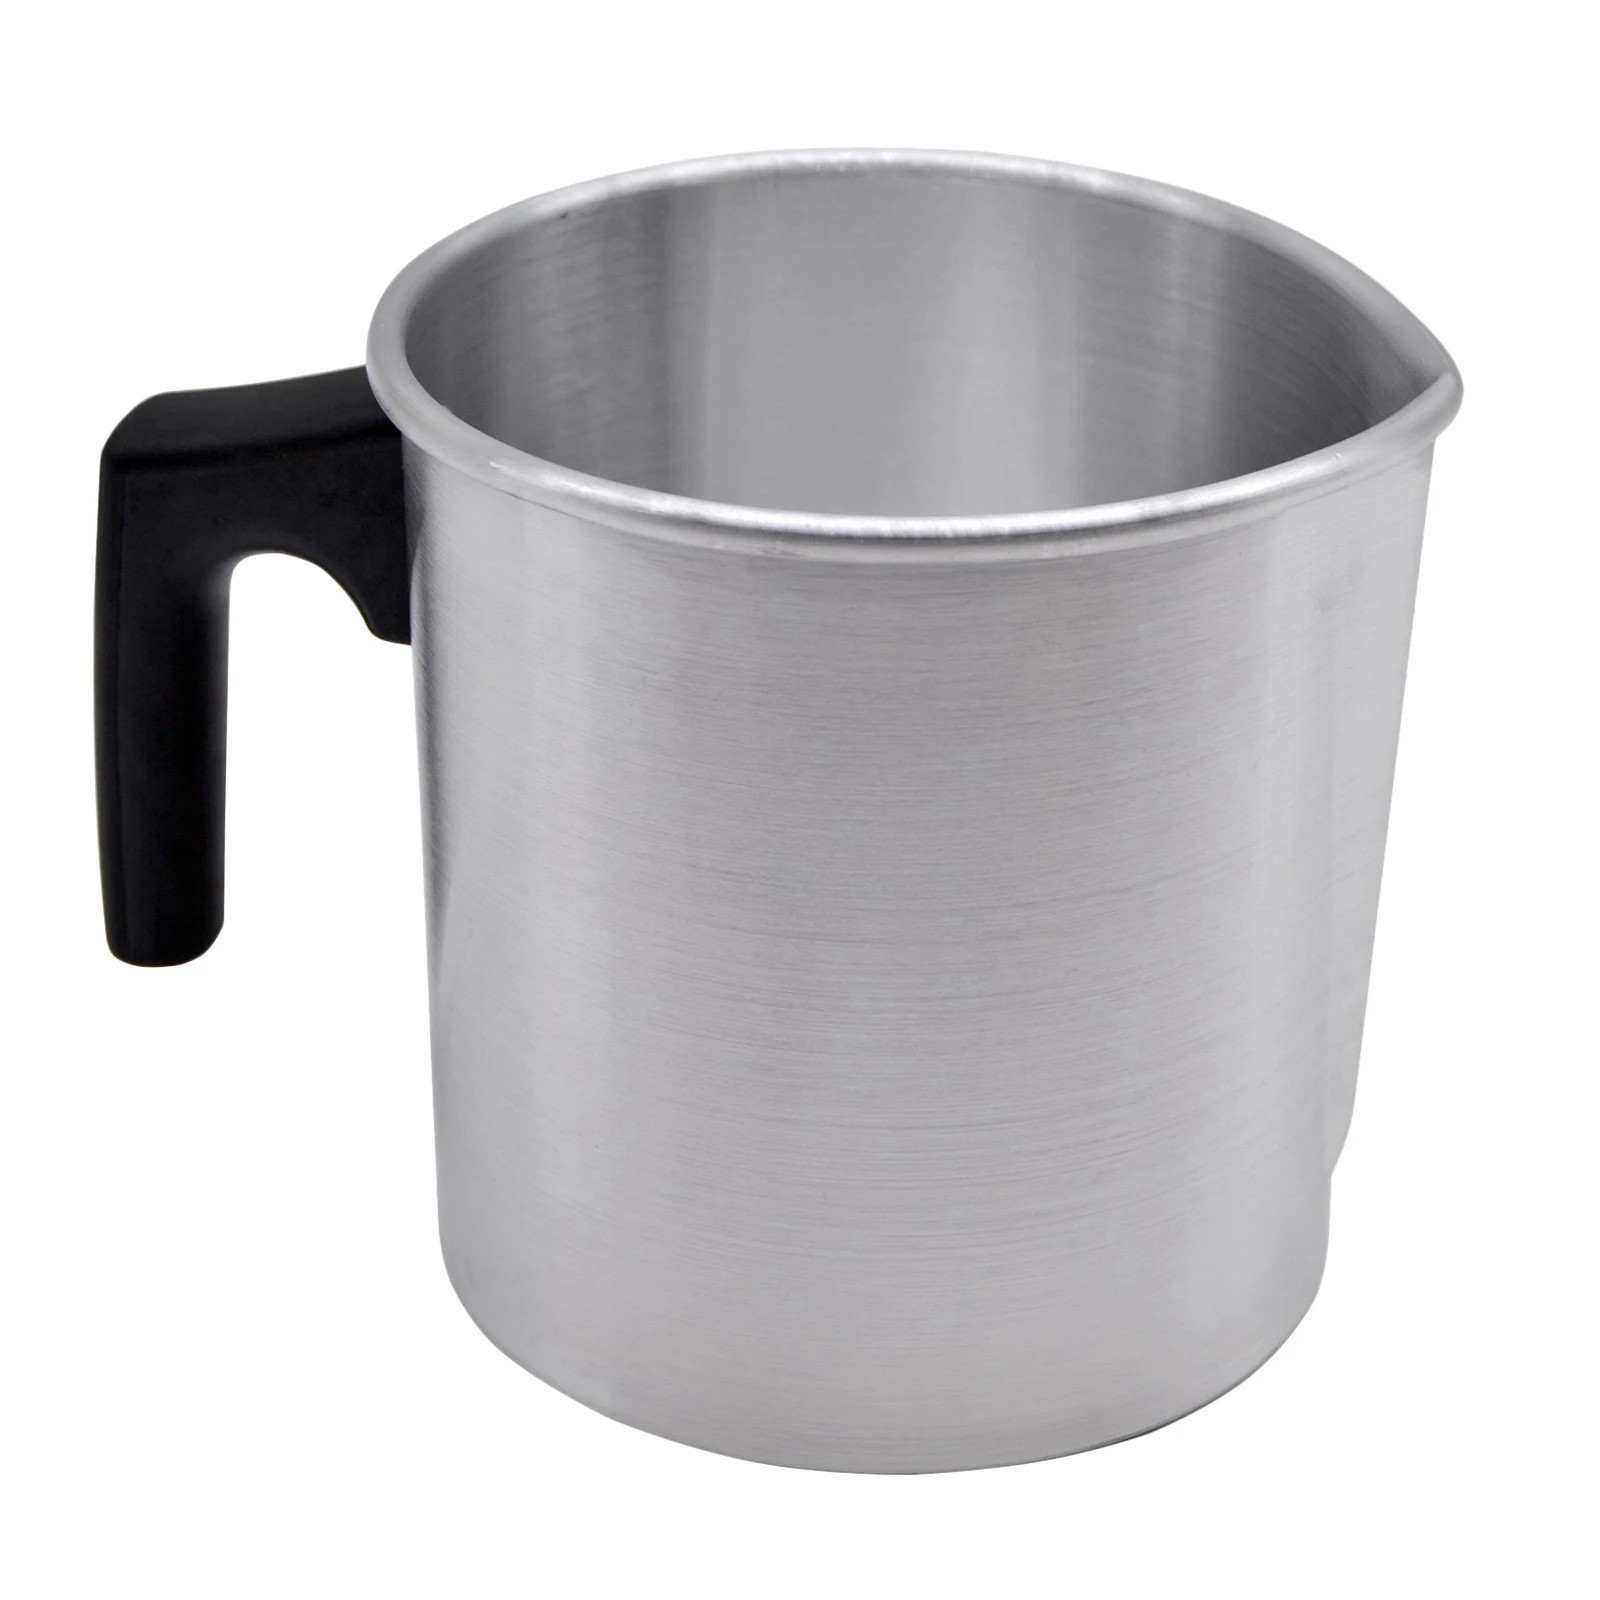 Large Watering Can Candle Making Wax Melting Cup Coffee Pot Kitchen DIY 1.2L